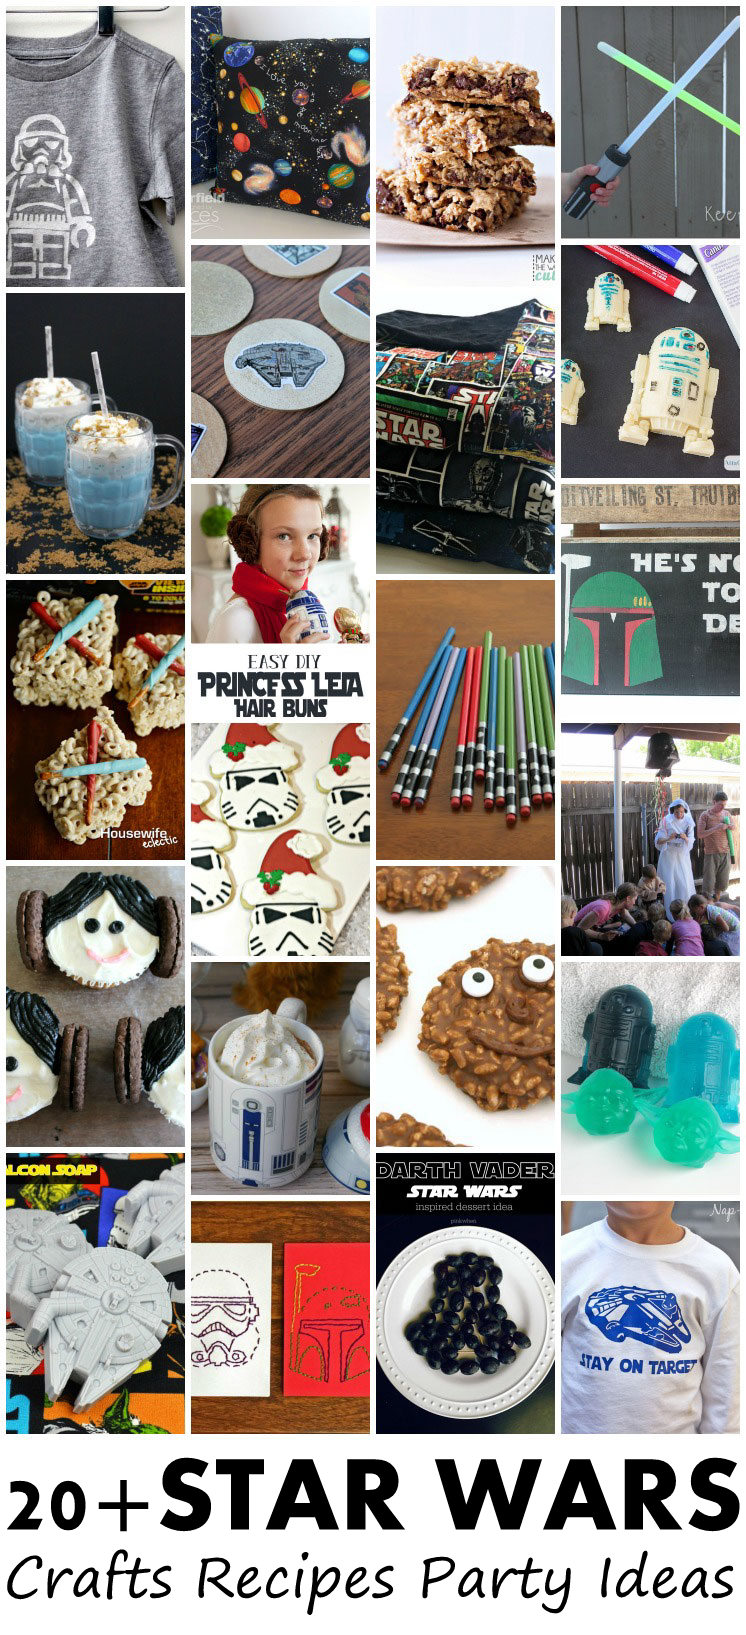 20+ Star Wars Crafts, Recipes and Party Ideas {MMM #311 Block Party} -  Keeping it Simple